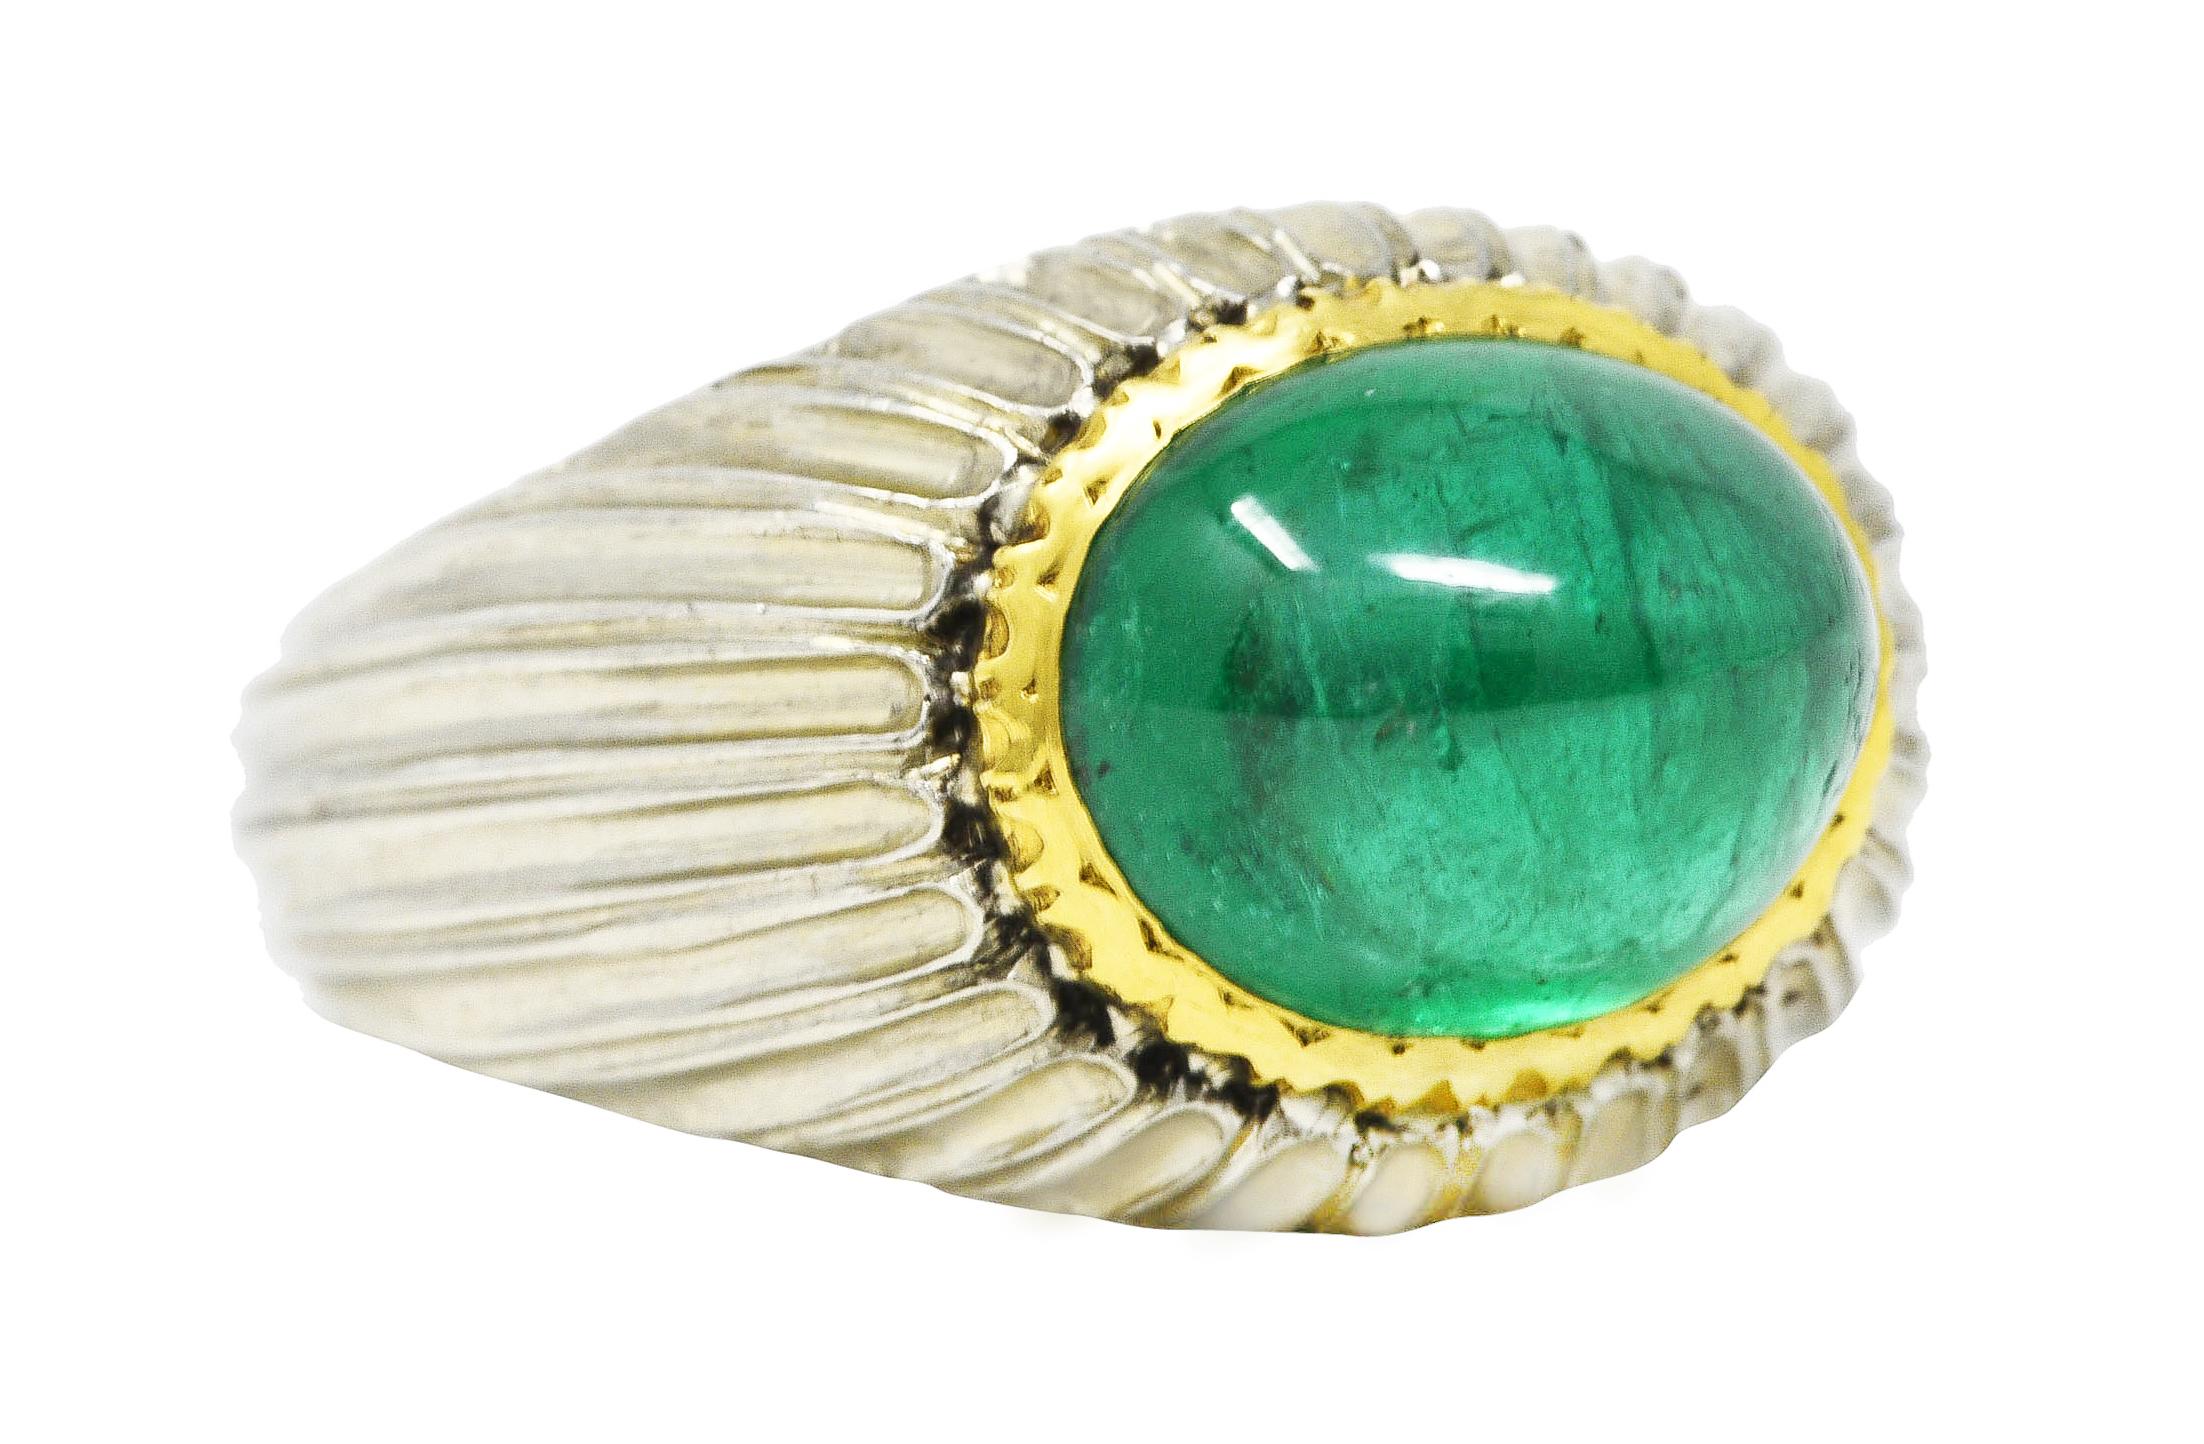 Bombè band ring is highly rendered with a deeply fluted texture. While centering an oval cut emerald double cabochon weighing approximately 4.83 carats. Very strongly bluish green in color and semi-transparent with natural inclusions. Bezel set in a